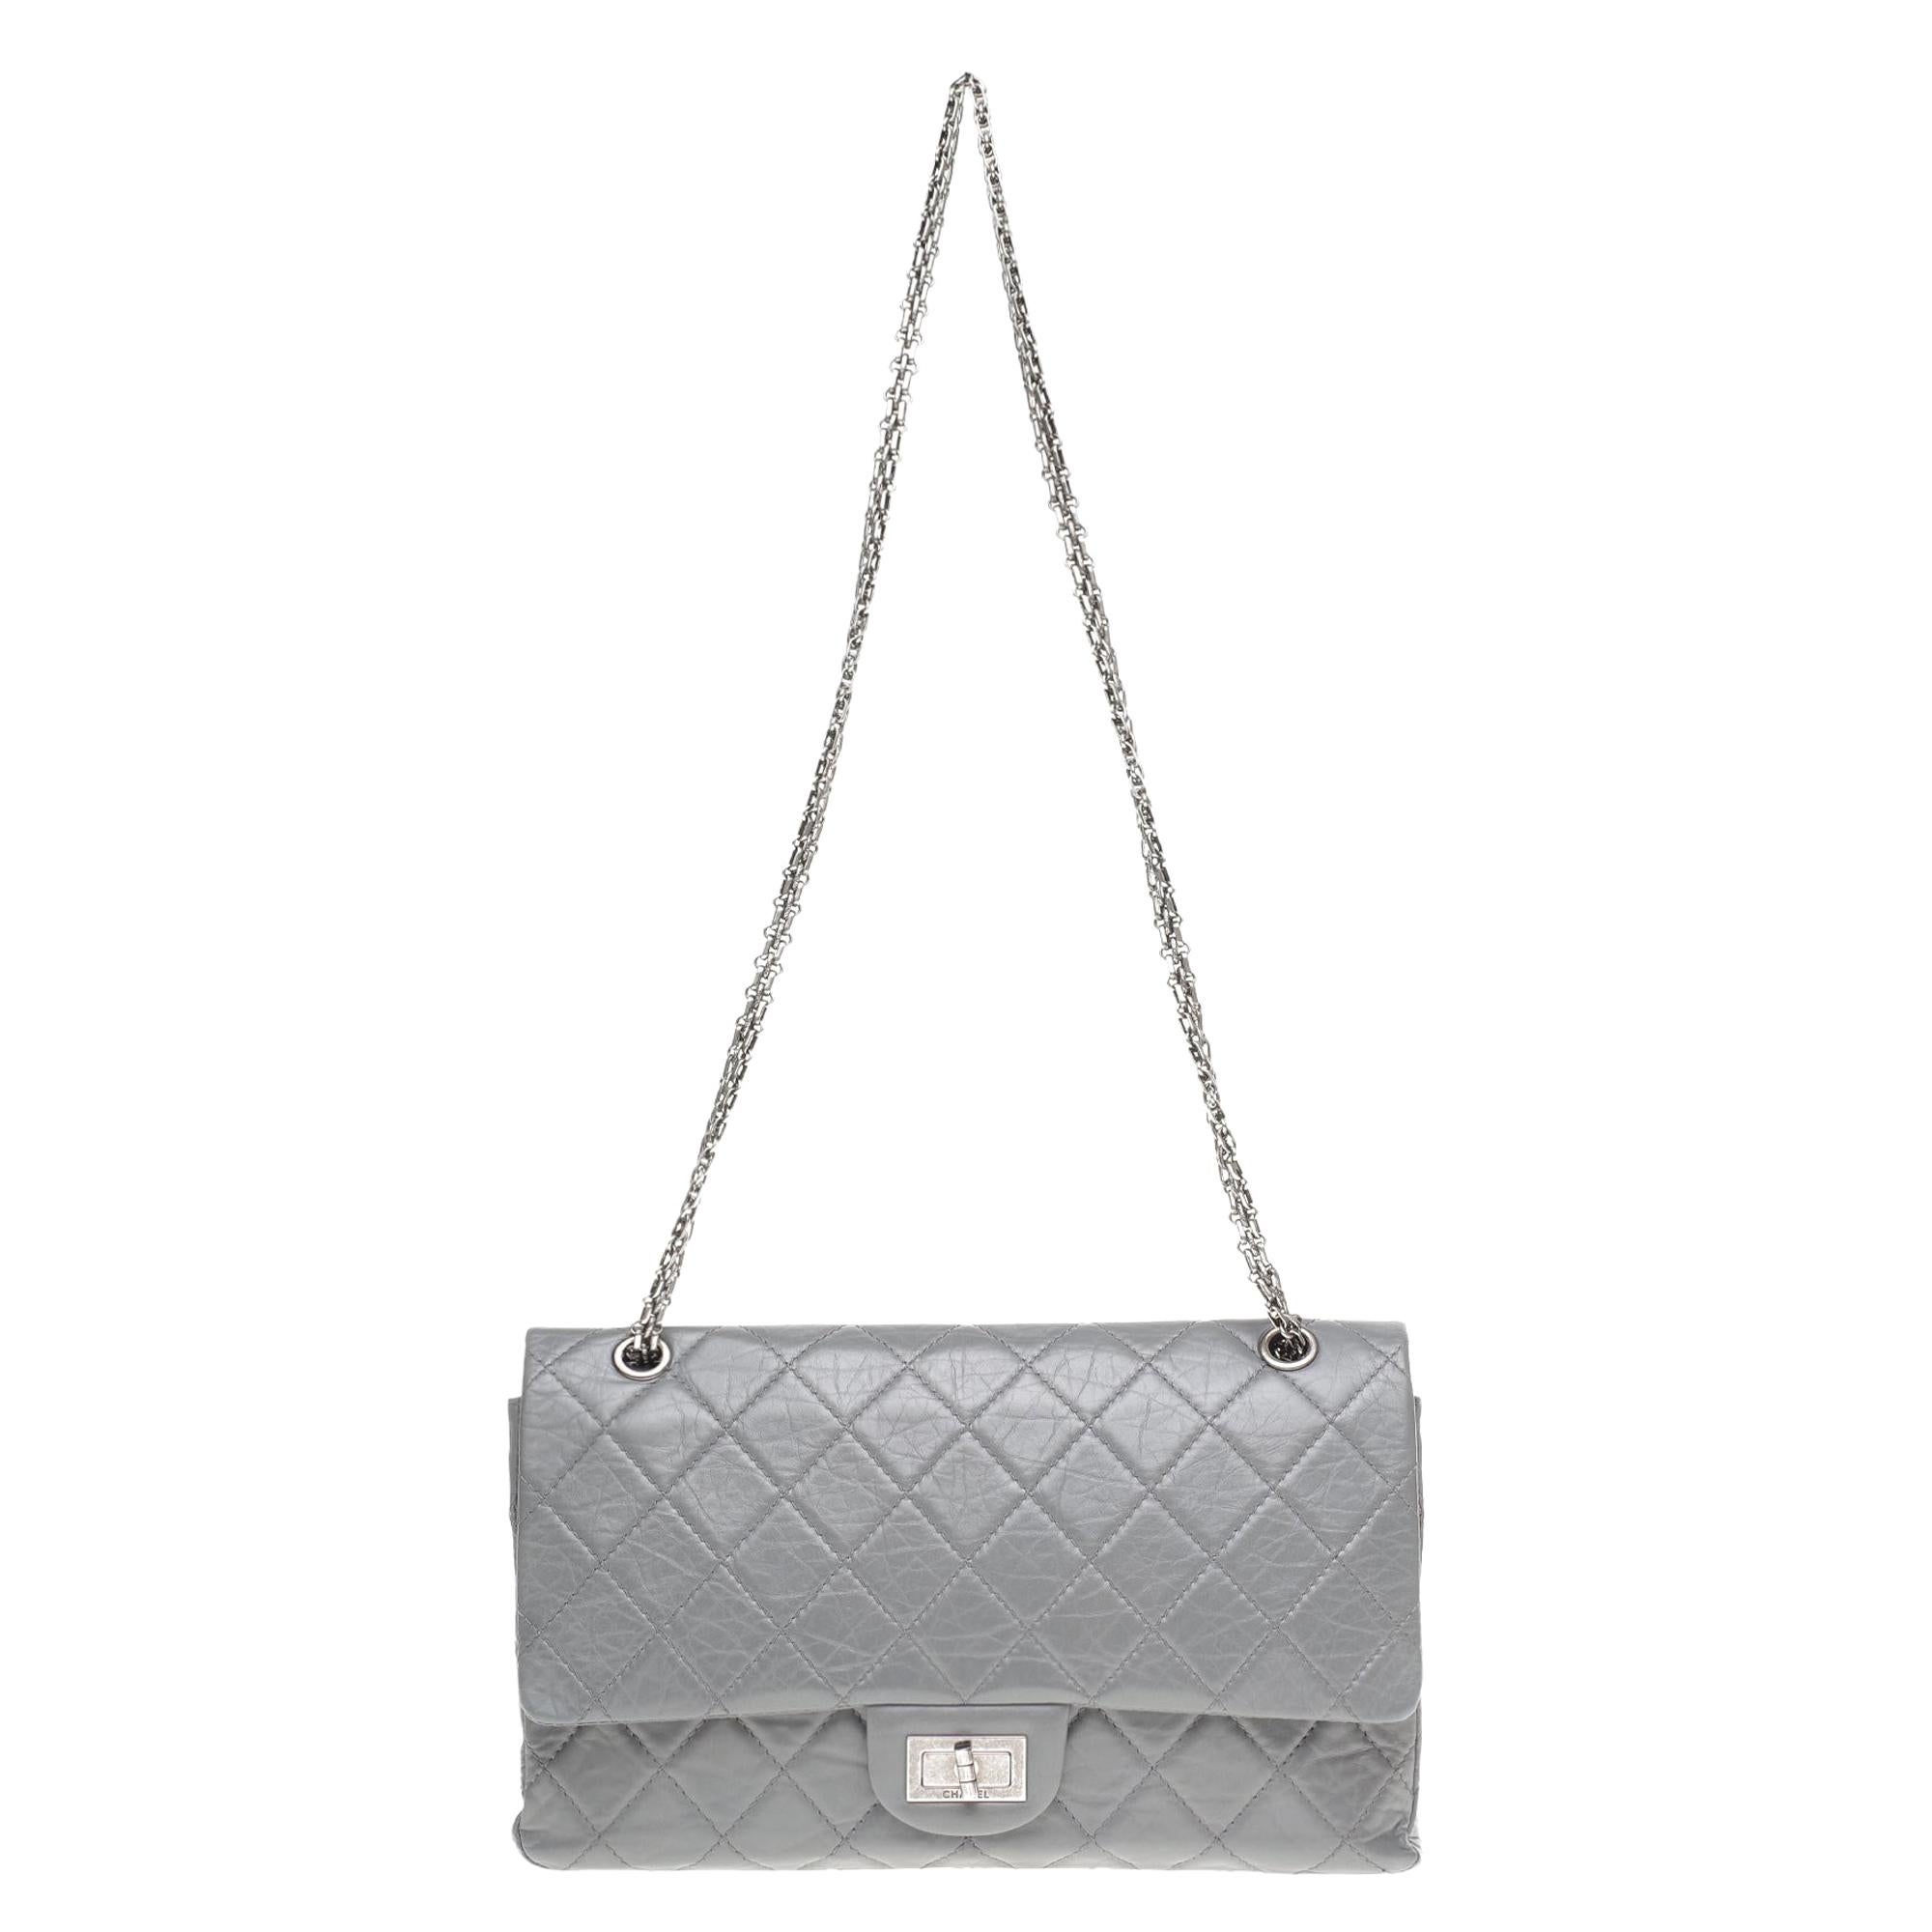 Amazing Chanel 2.55 Reissue shoulder bag in grey quilted leather